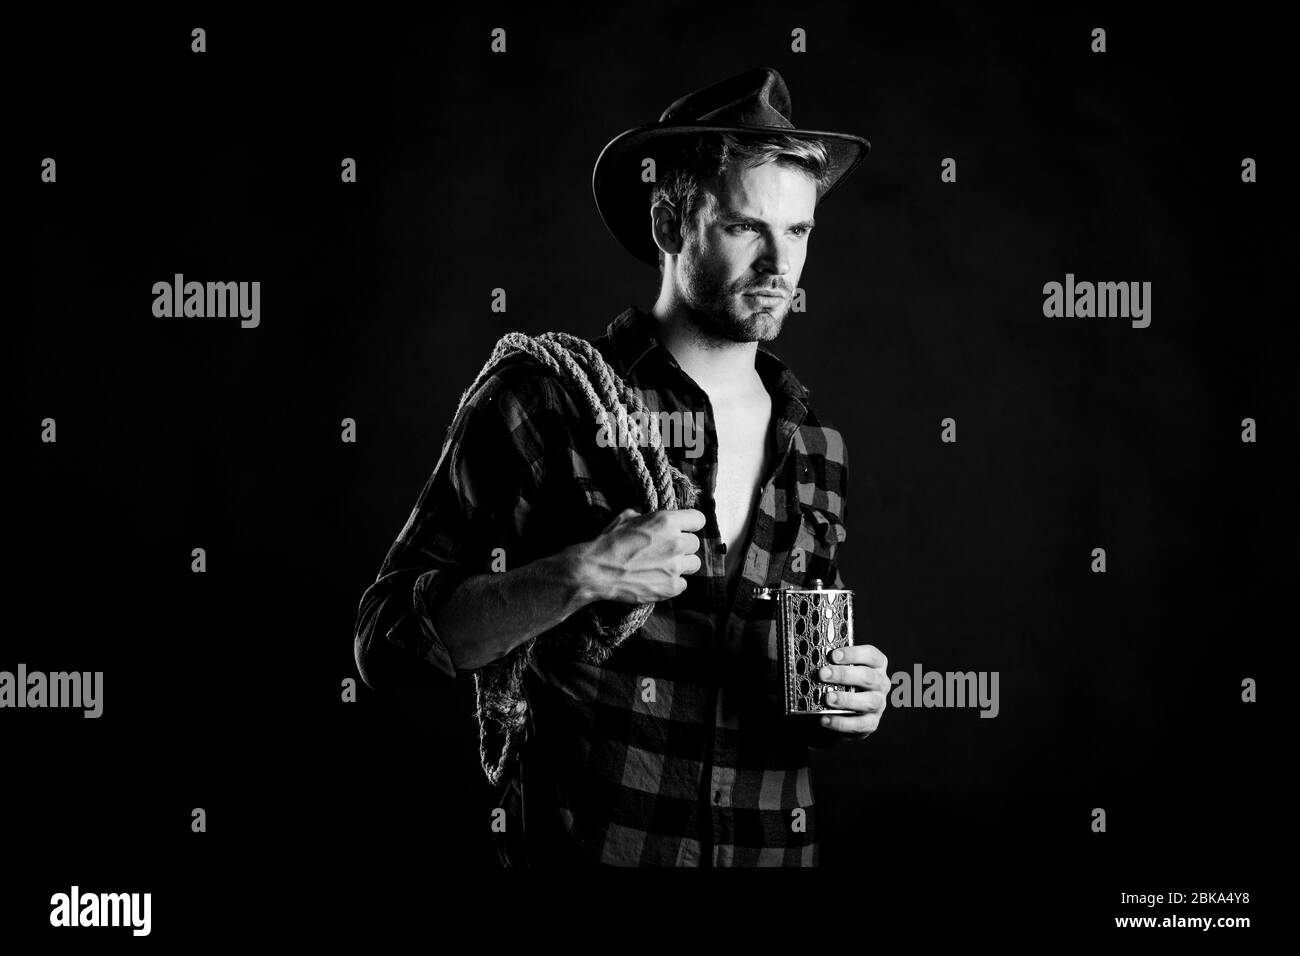 Sheriff concept. Brutal cowboy drinking alcohol. Western culture. Man wearing hat hold rope and flask. Lasso tool of American cowboy. Man handsome unshaven cowboy black background. Western life. Stock Photo